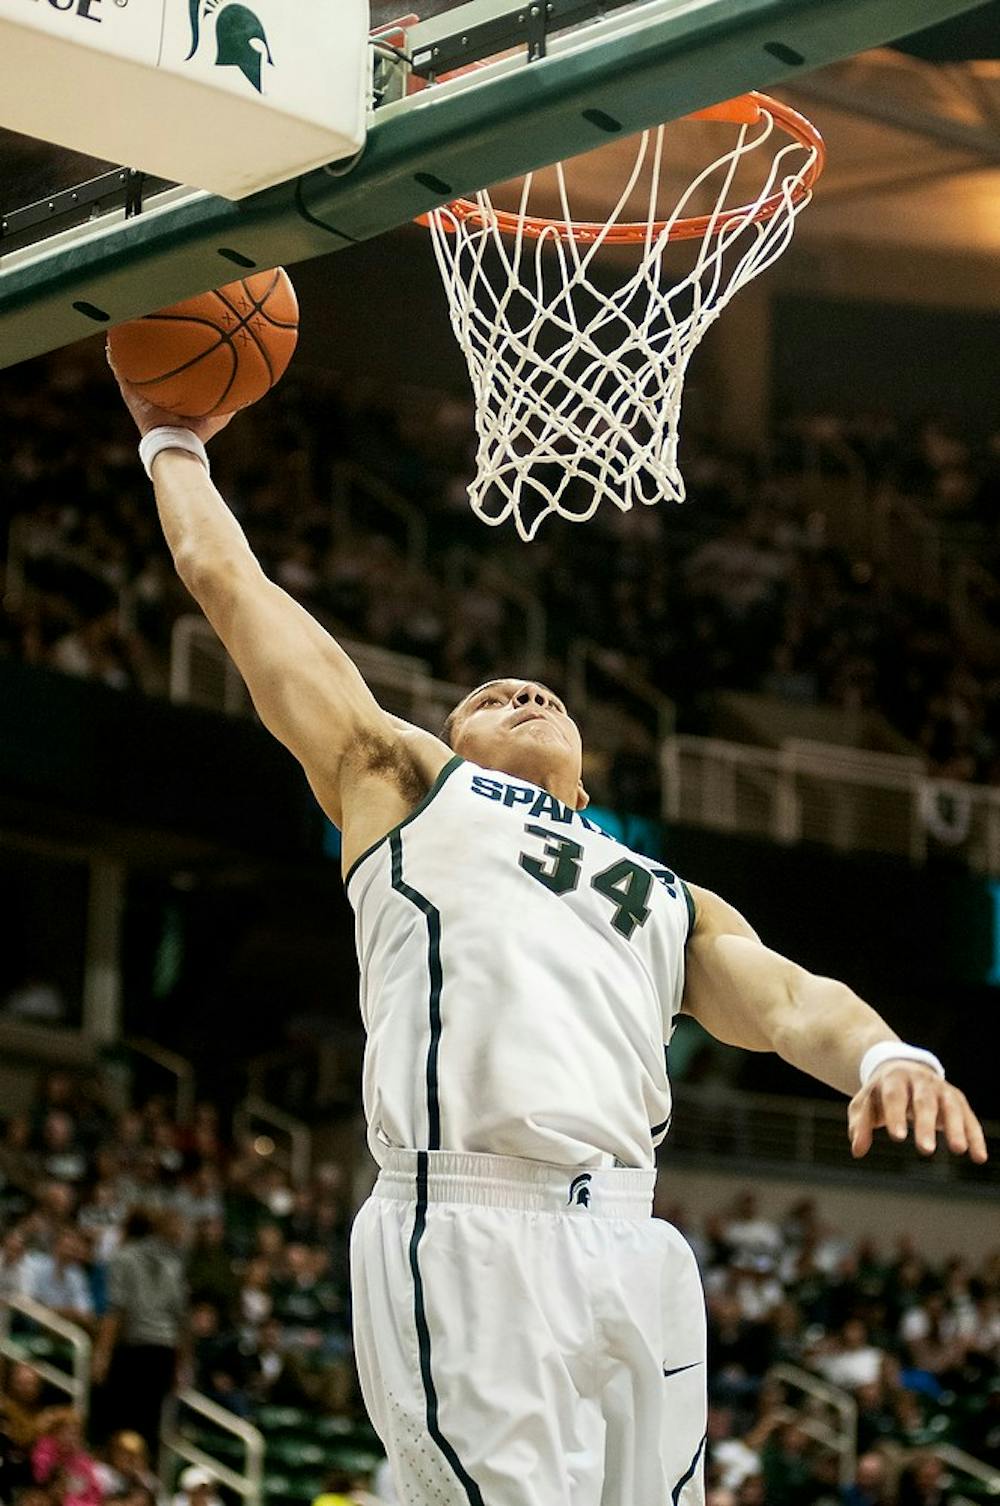 	<p>Freshman forward Gavin Schilling grabs a rebound to dunk the ball during the game against Indiana University of Pennsylvania, Nov. 4, 2013, at Breslin Center. The Spartans are leading at halftime, 47-26. Danyelle Morrow/The State News</p>